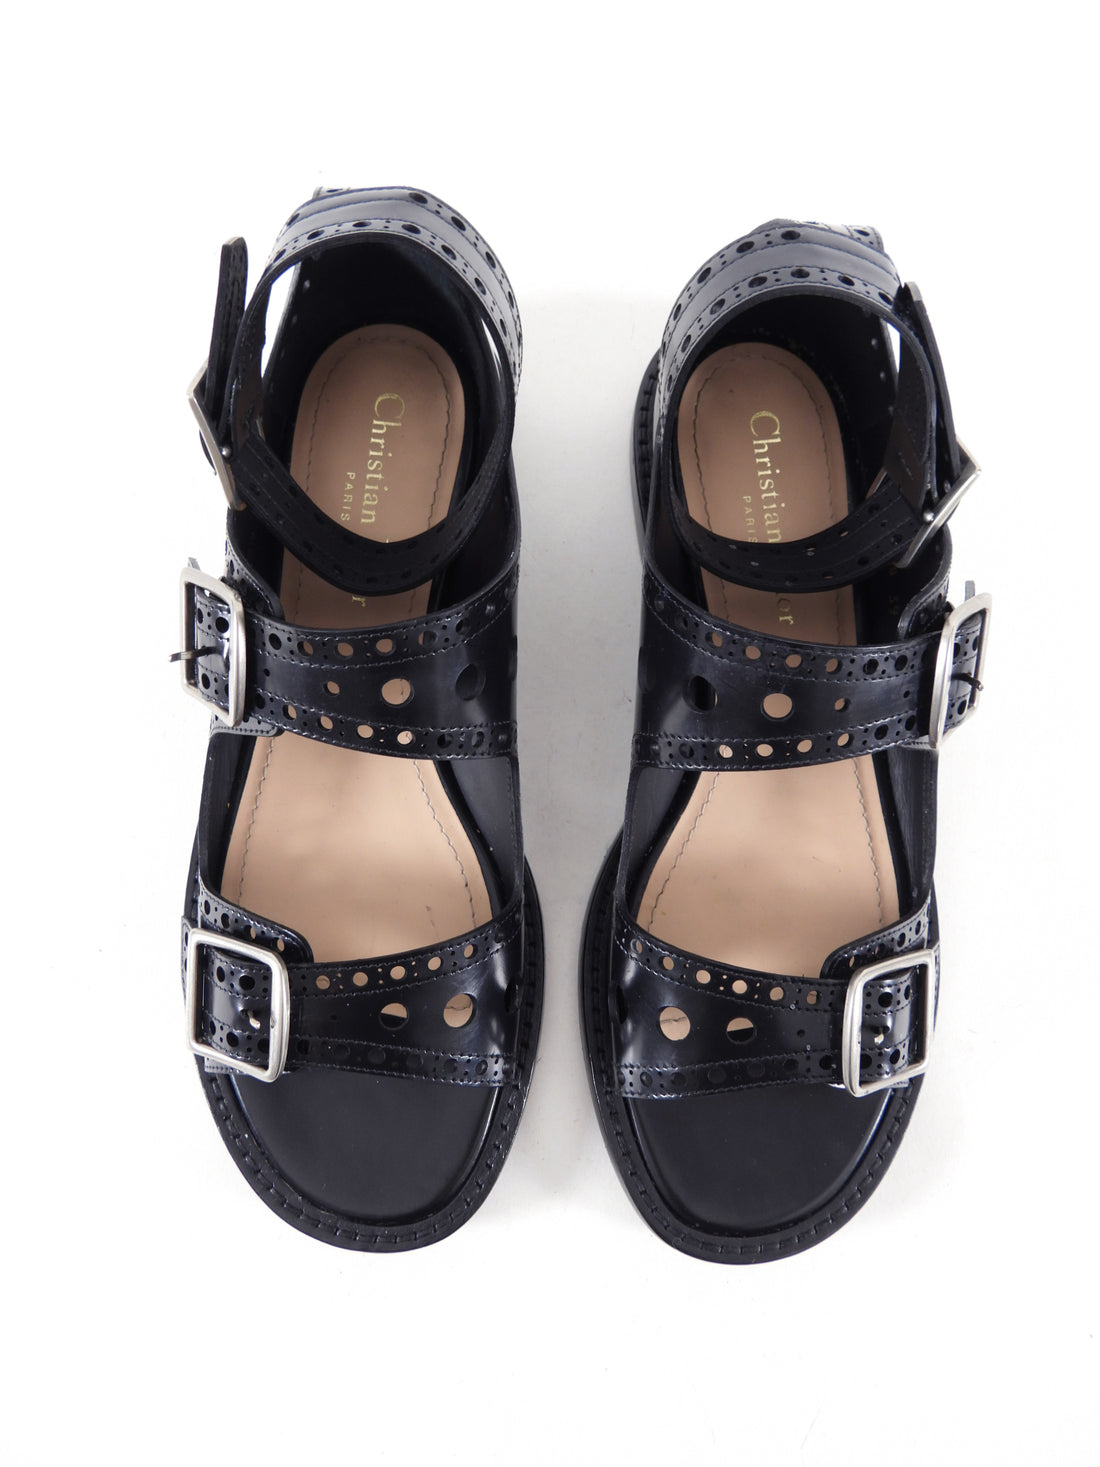 Dior Black Perforated Leather Teddy D Buckle Flat Sandals - 39 / USA 8.5